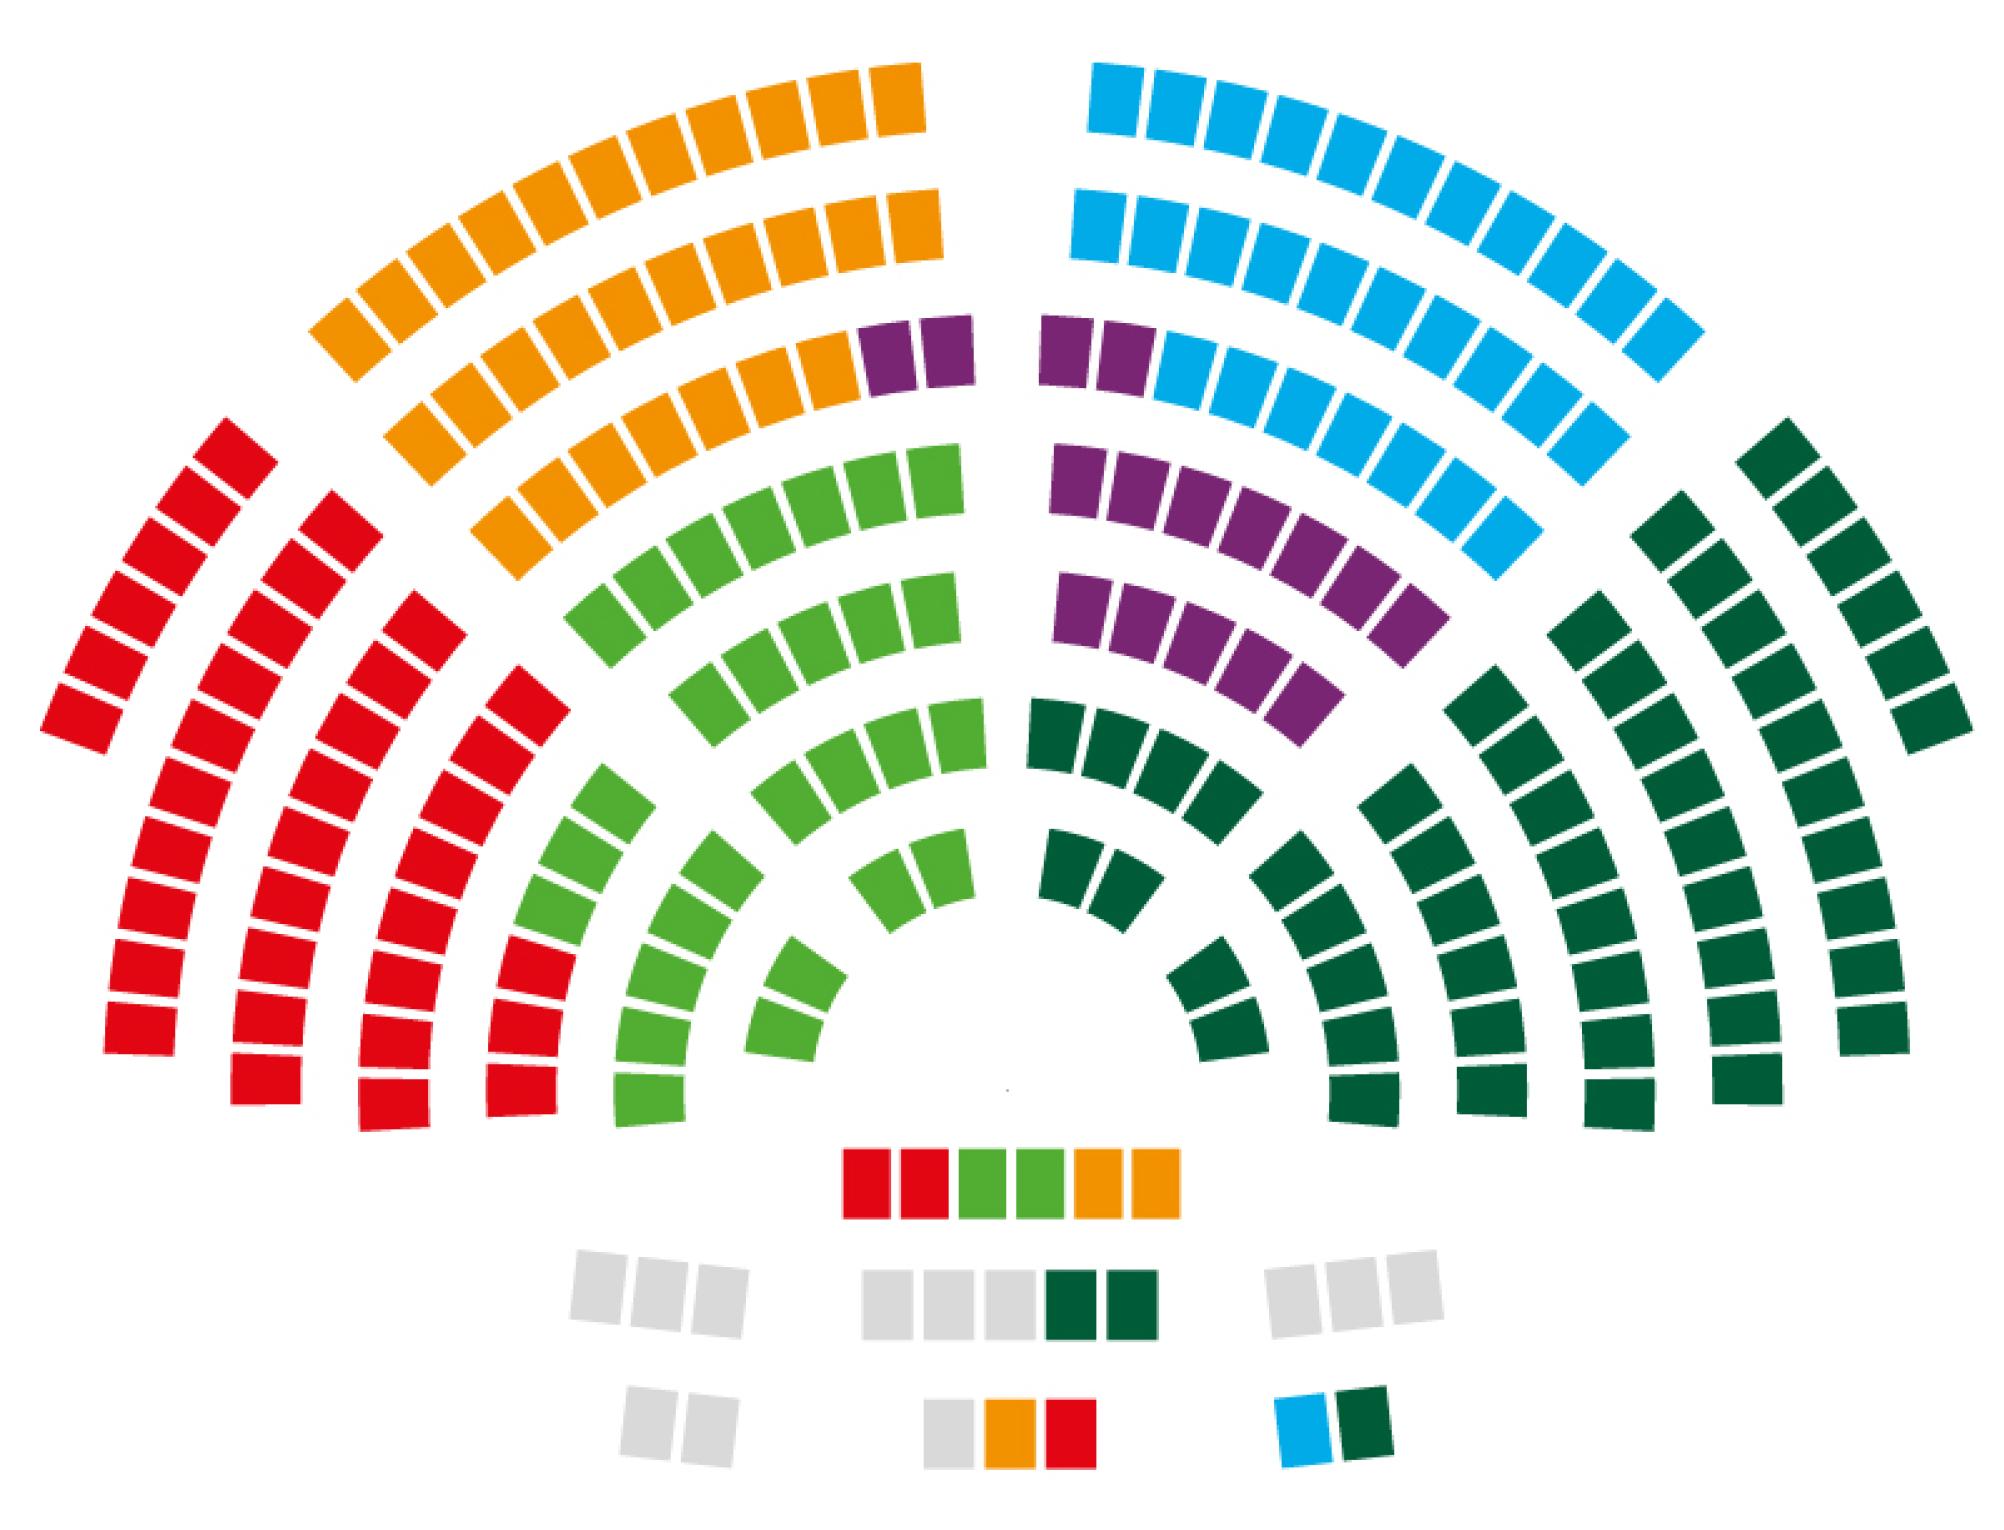 The diagram shows how the 200 seats of the National Council are allocated among the six parliamentary groups.